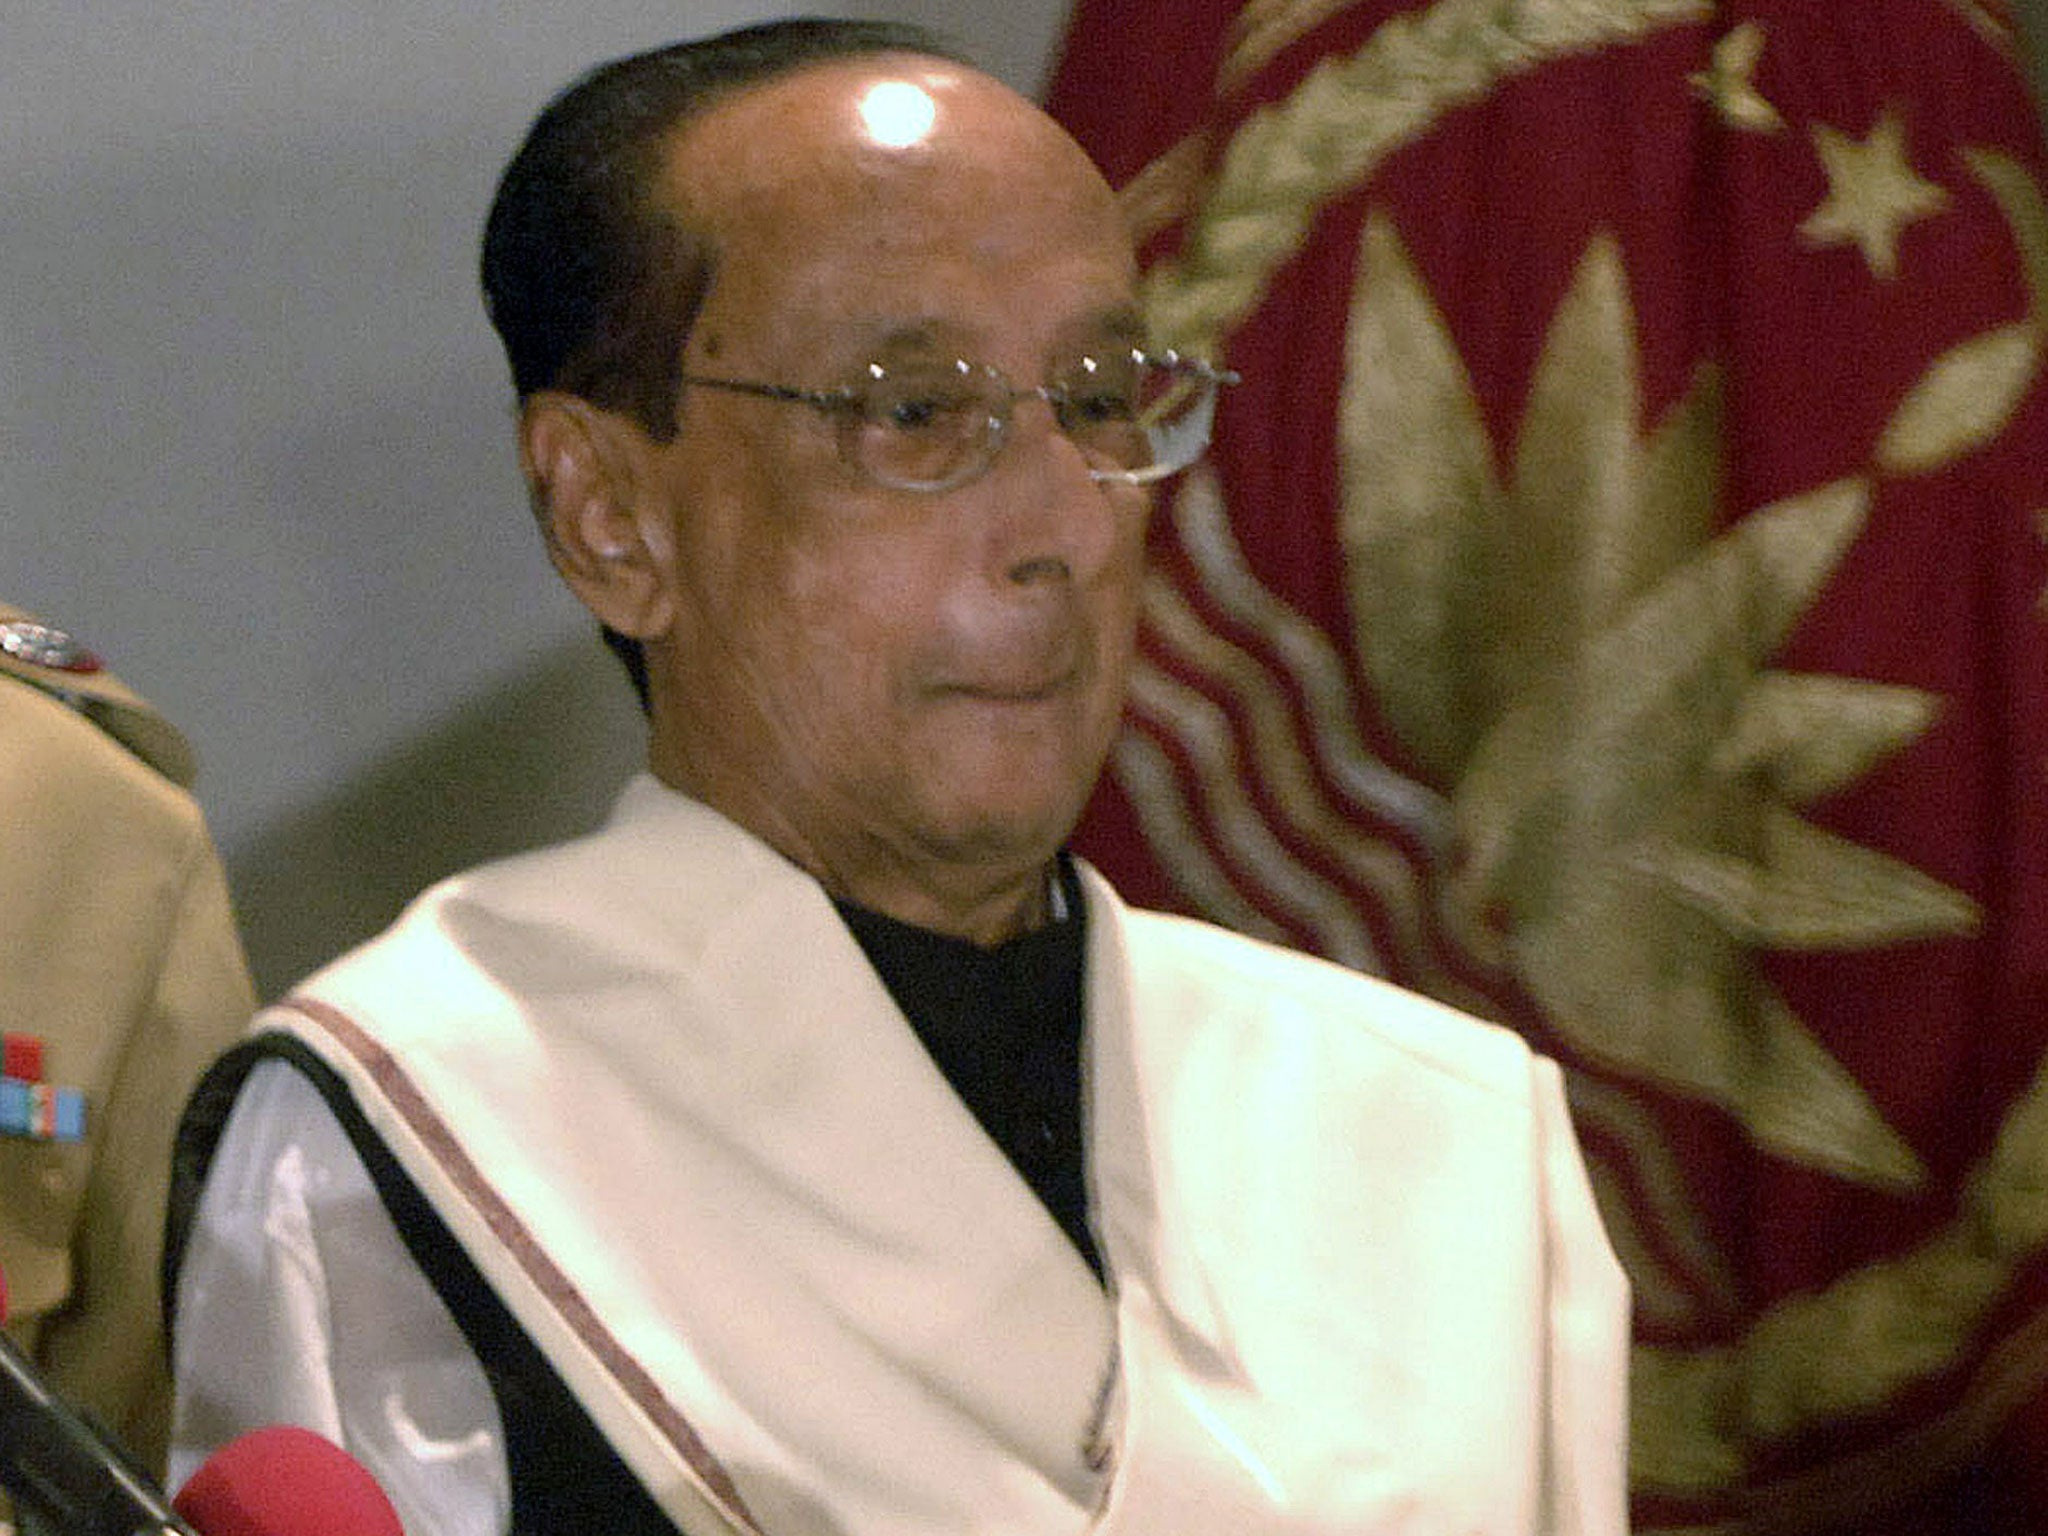 Zillur is sworn in as his country’s 19th president in 2009